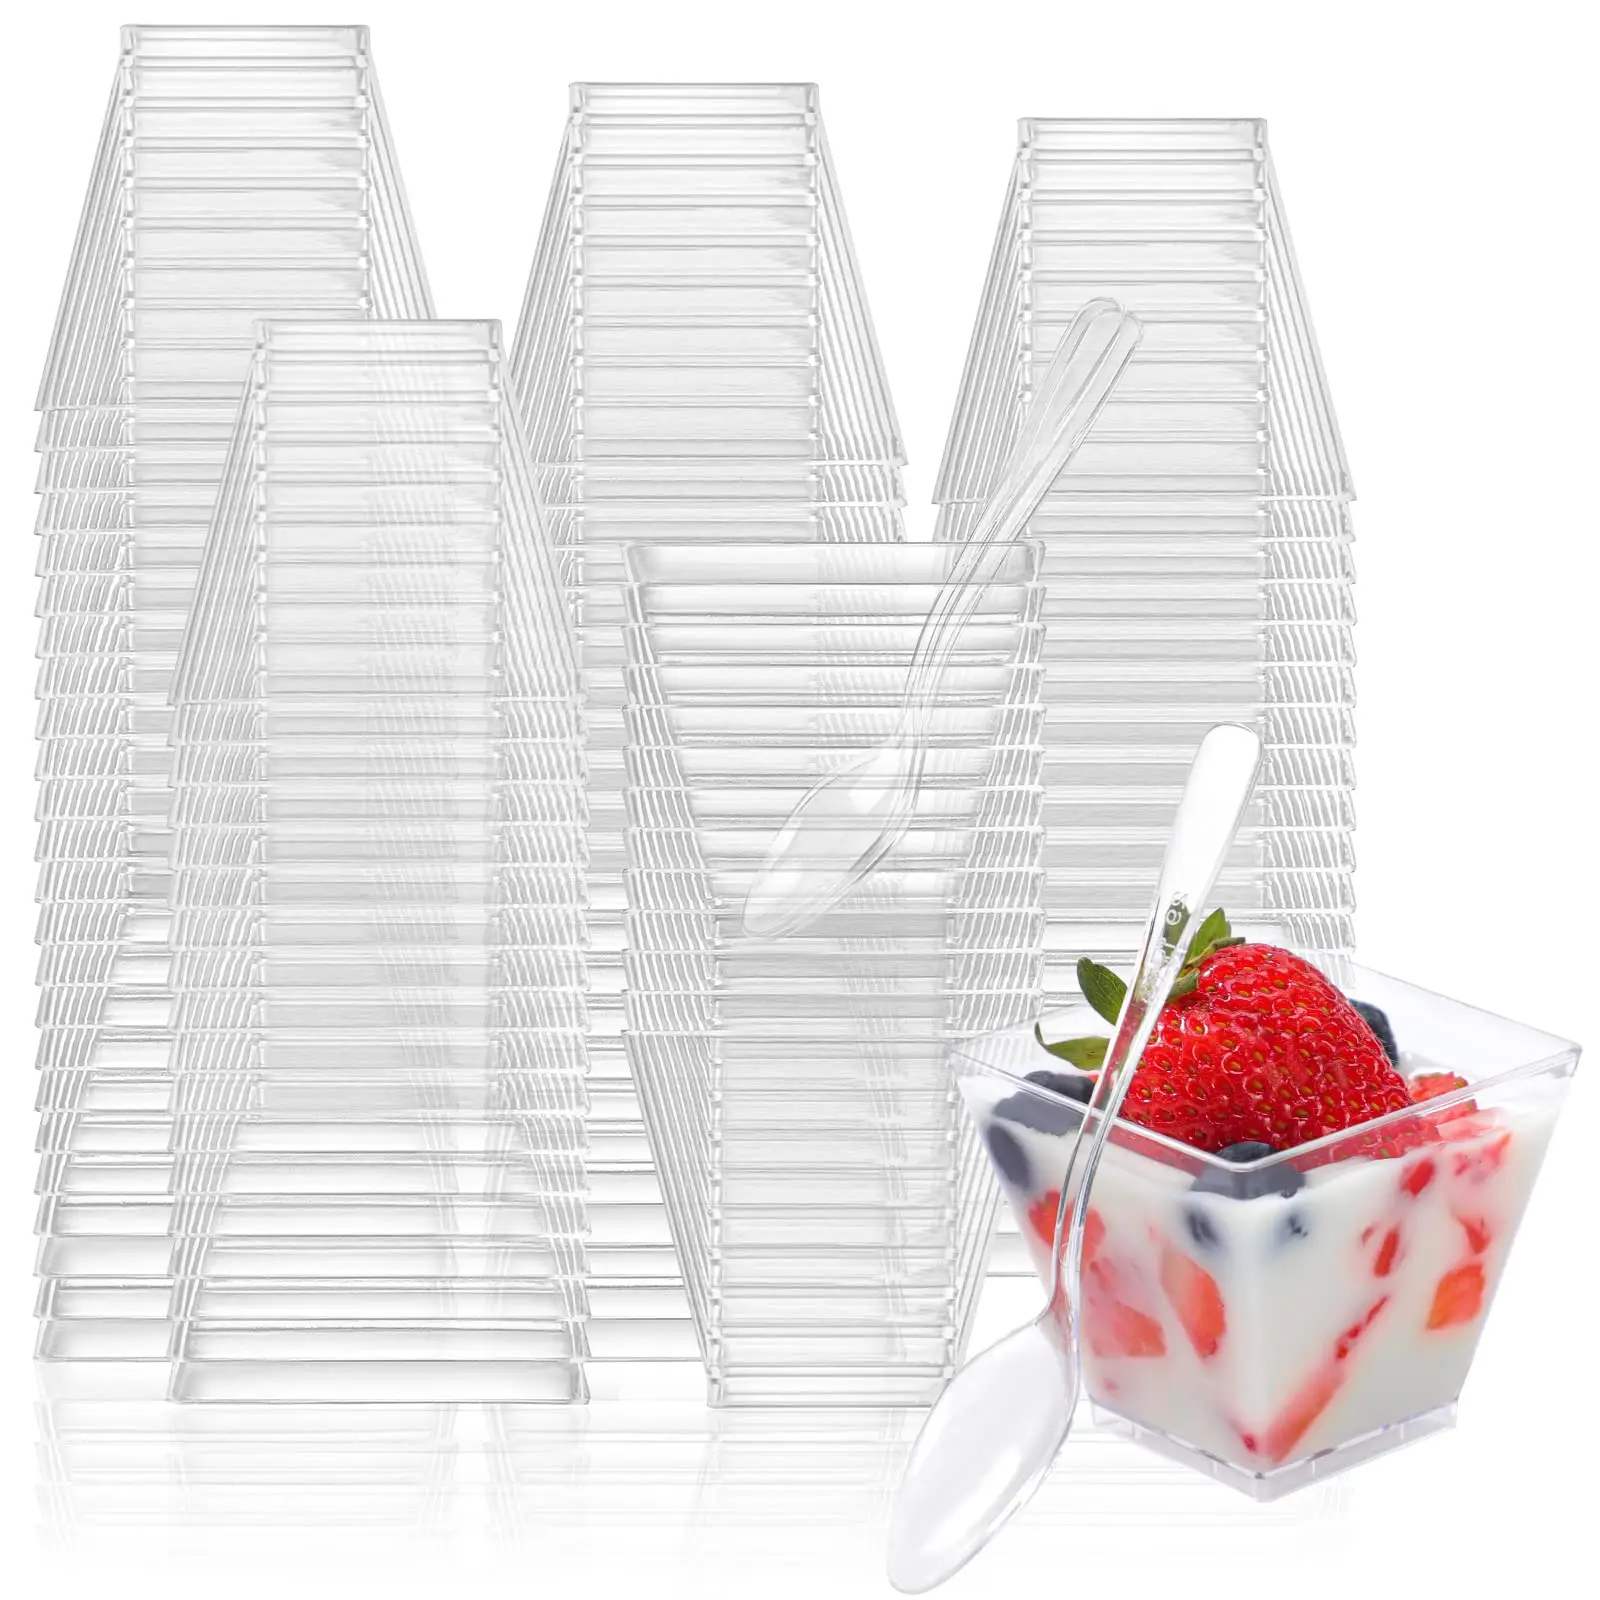 100Pack 2OZ Mini Dessert Cups For Party Small Plastic Dessert Cups Disposable Dessert Shooter Cups for Pudding Fruit Ice Cream